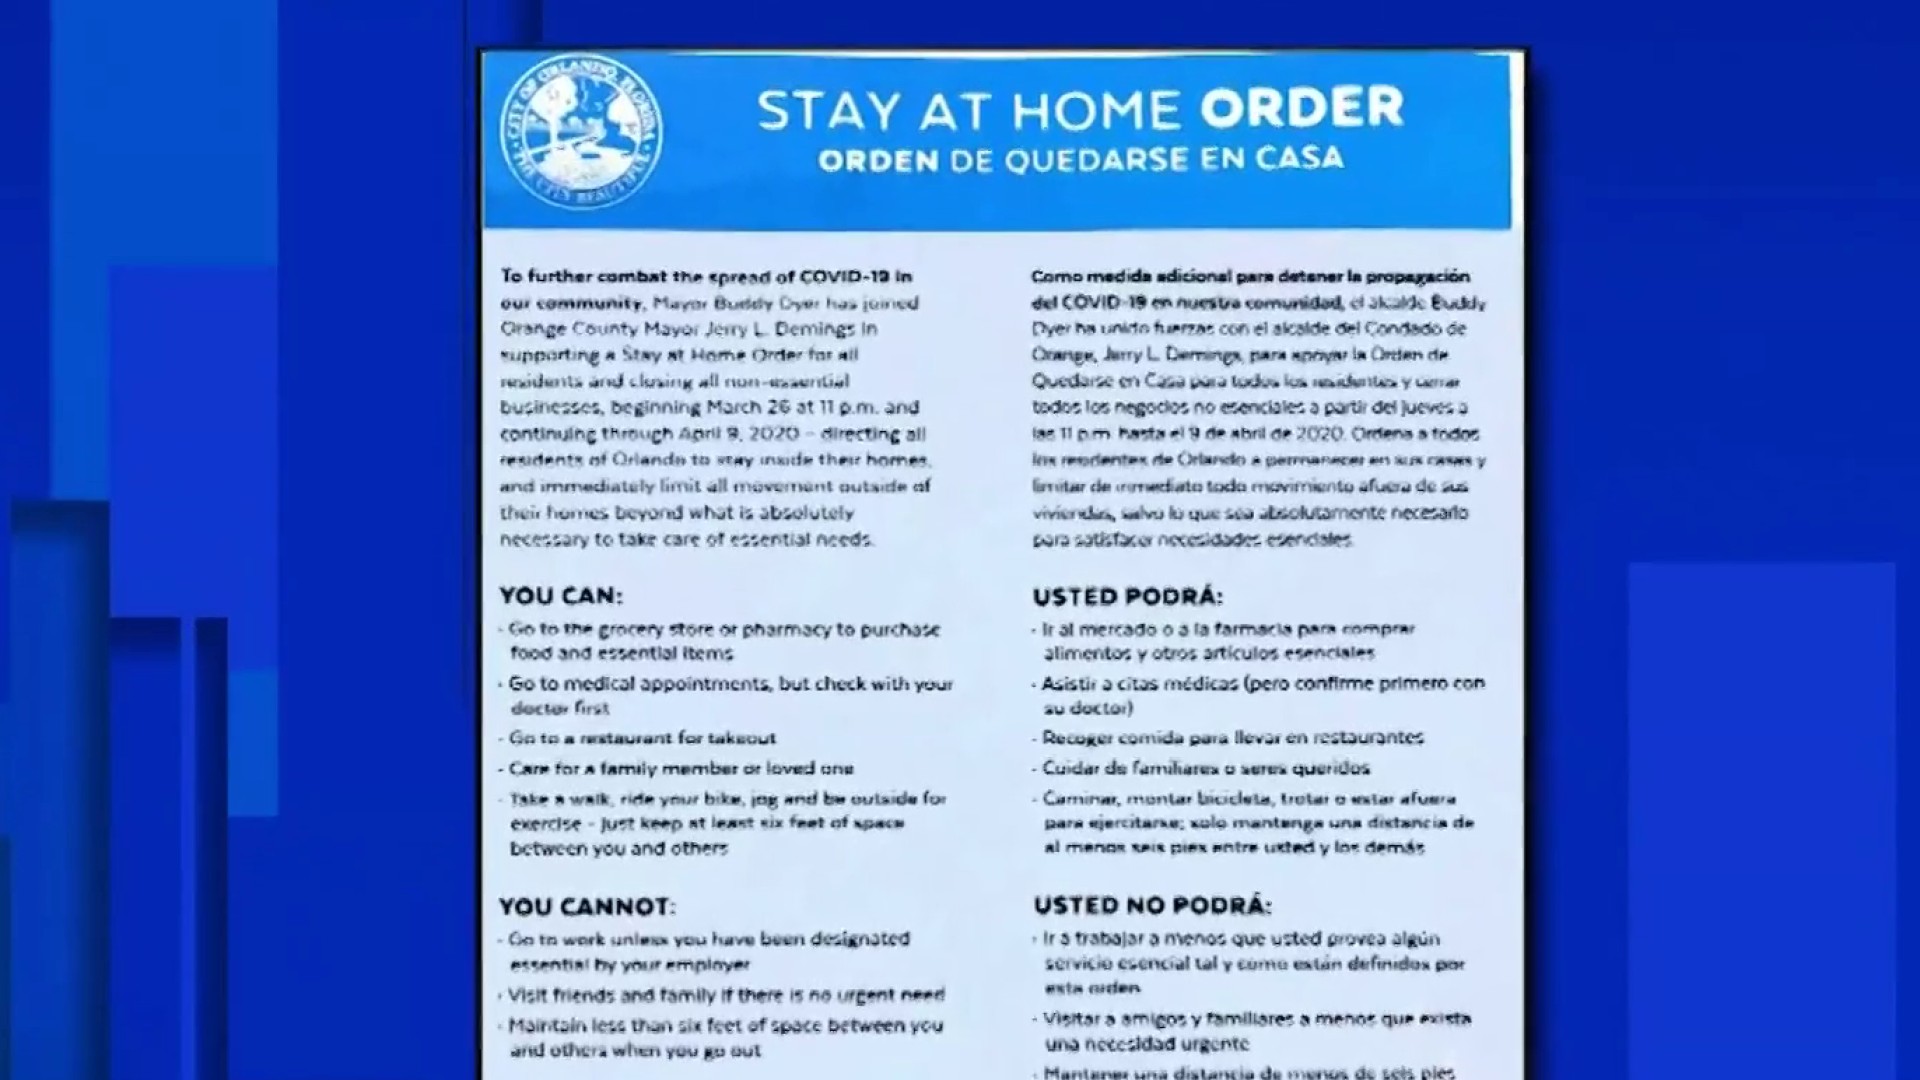 17+ De stay at home order info